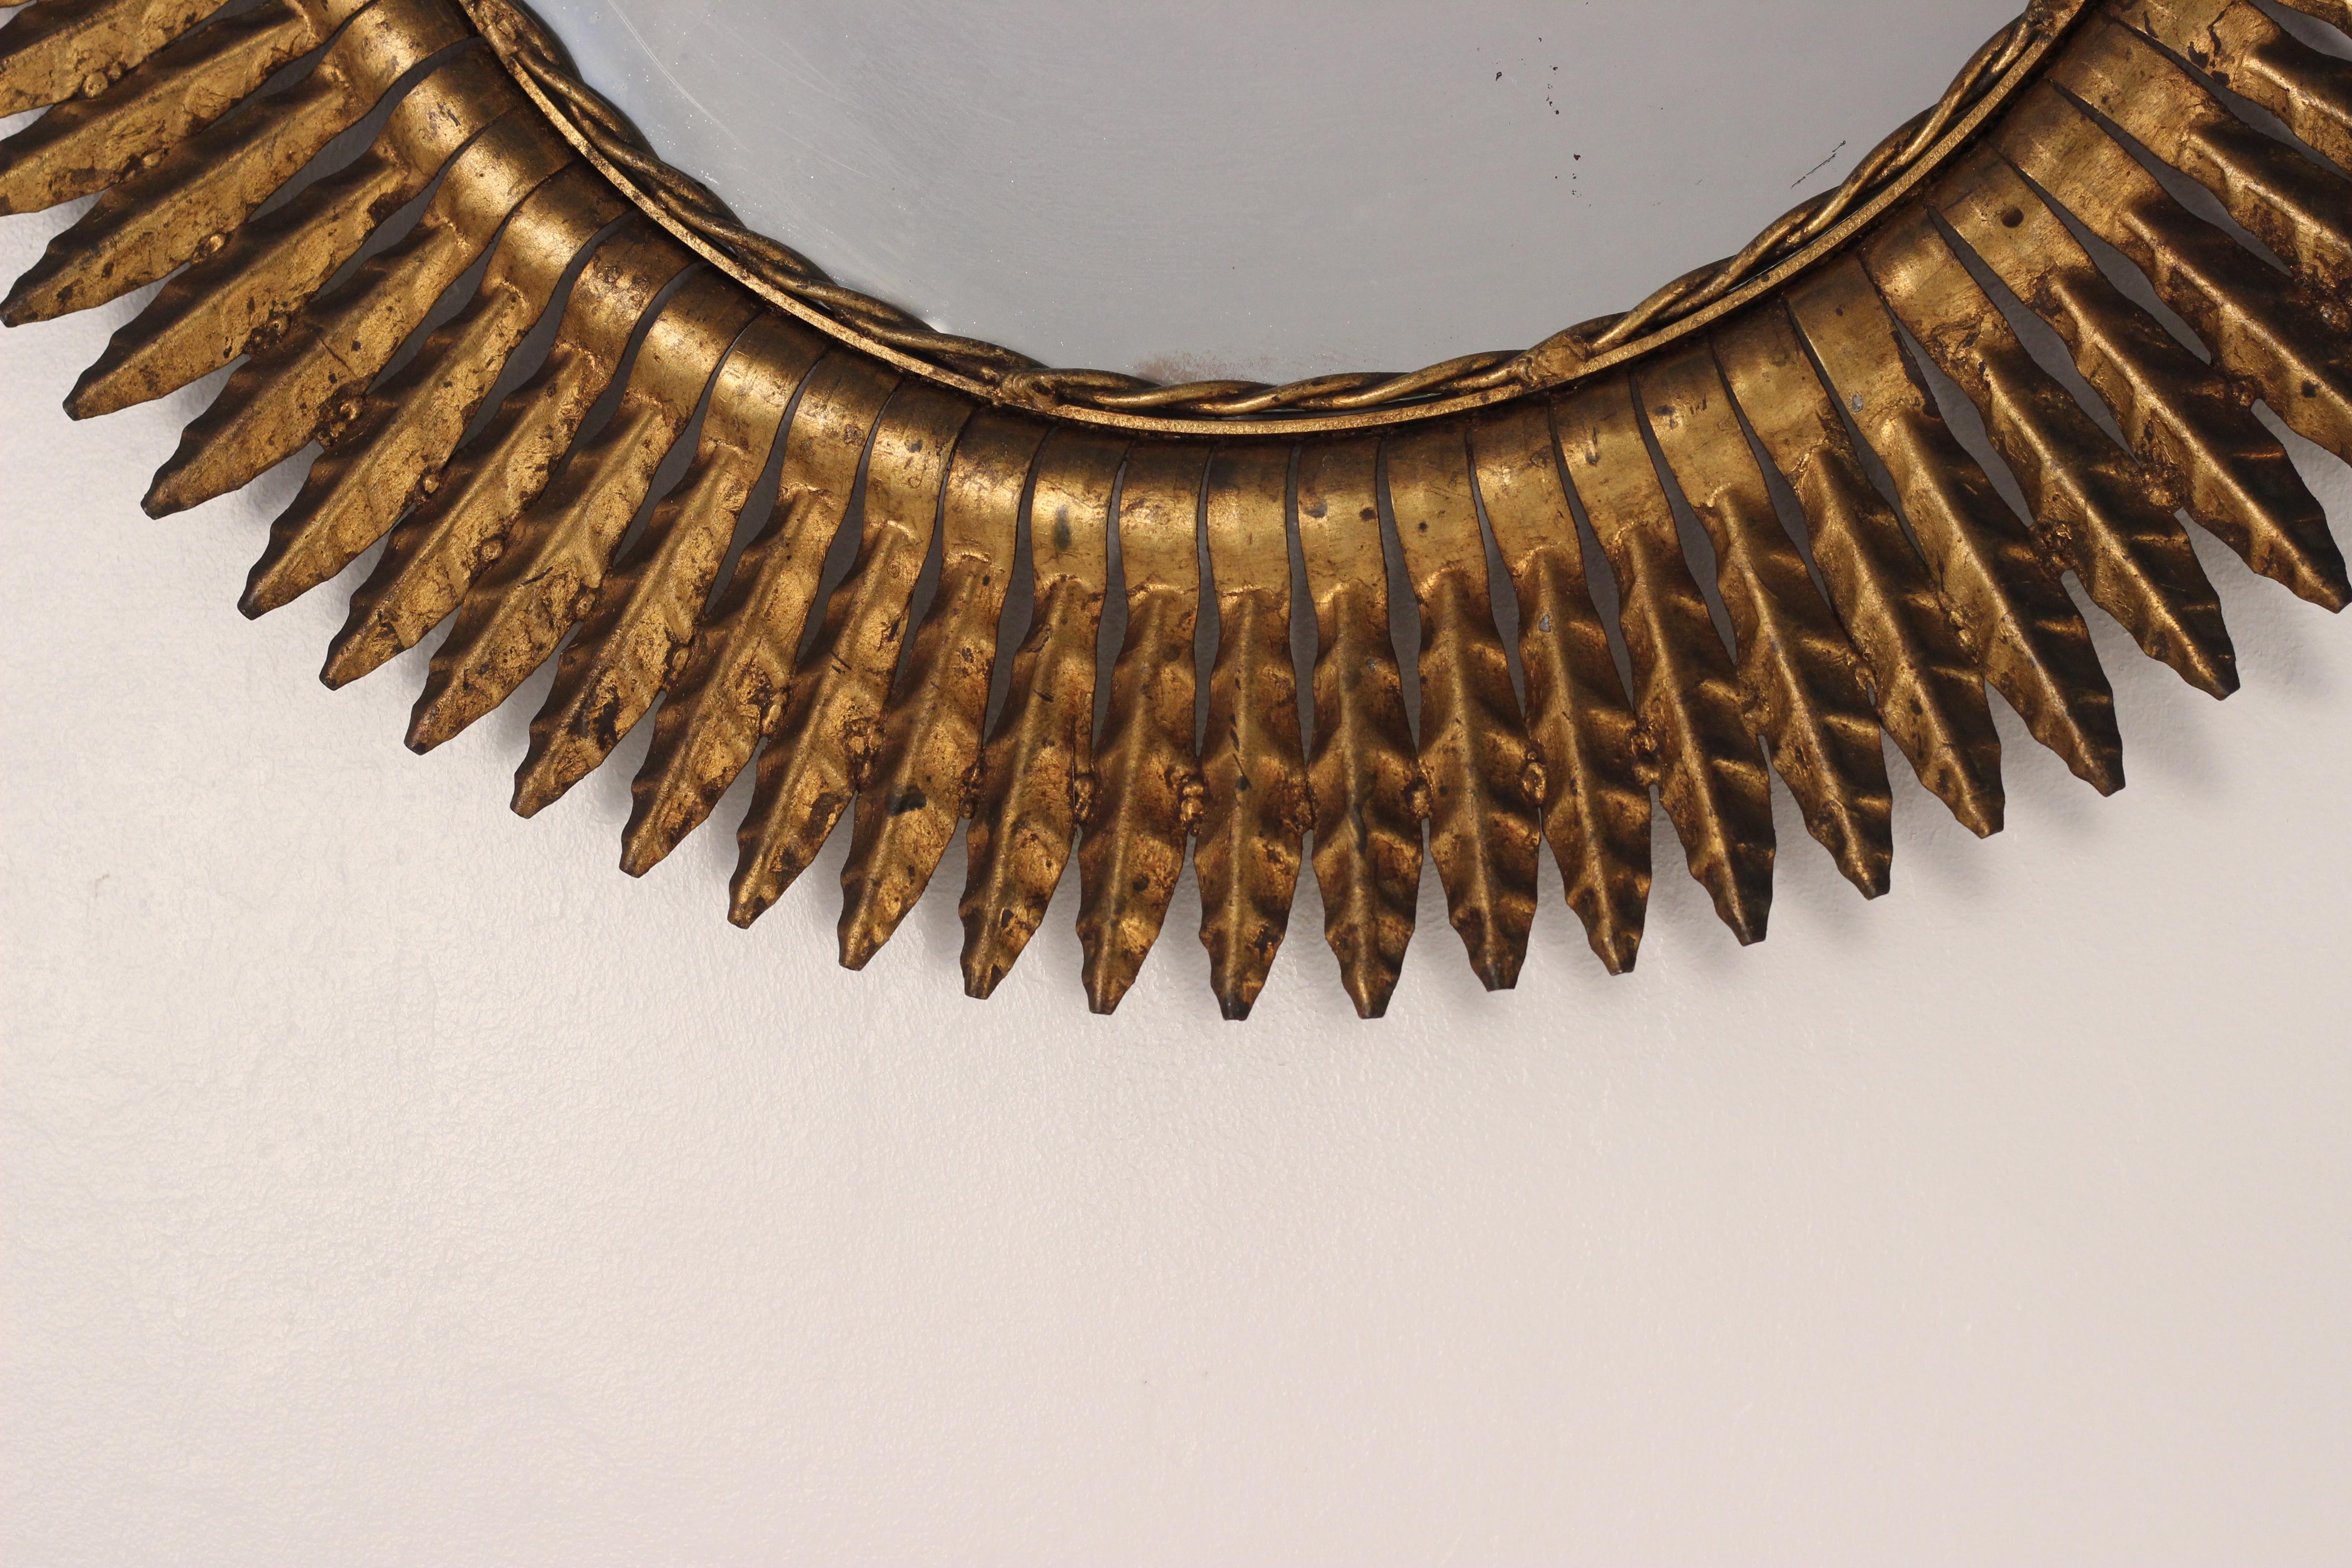 A Mid-Century Modern Gilt Hollywood Regency style Spanish Sunbeam 1950’s mirror. Would not look out of place in a Boho Chic Style layered interior, surrounded by ethnic and other artesian pieces.